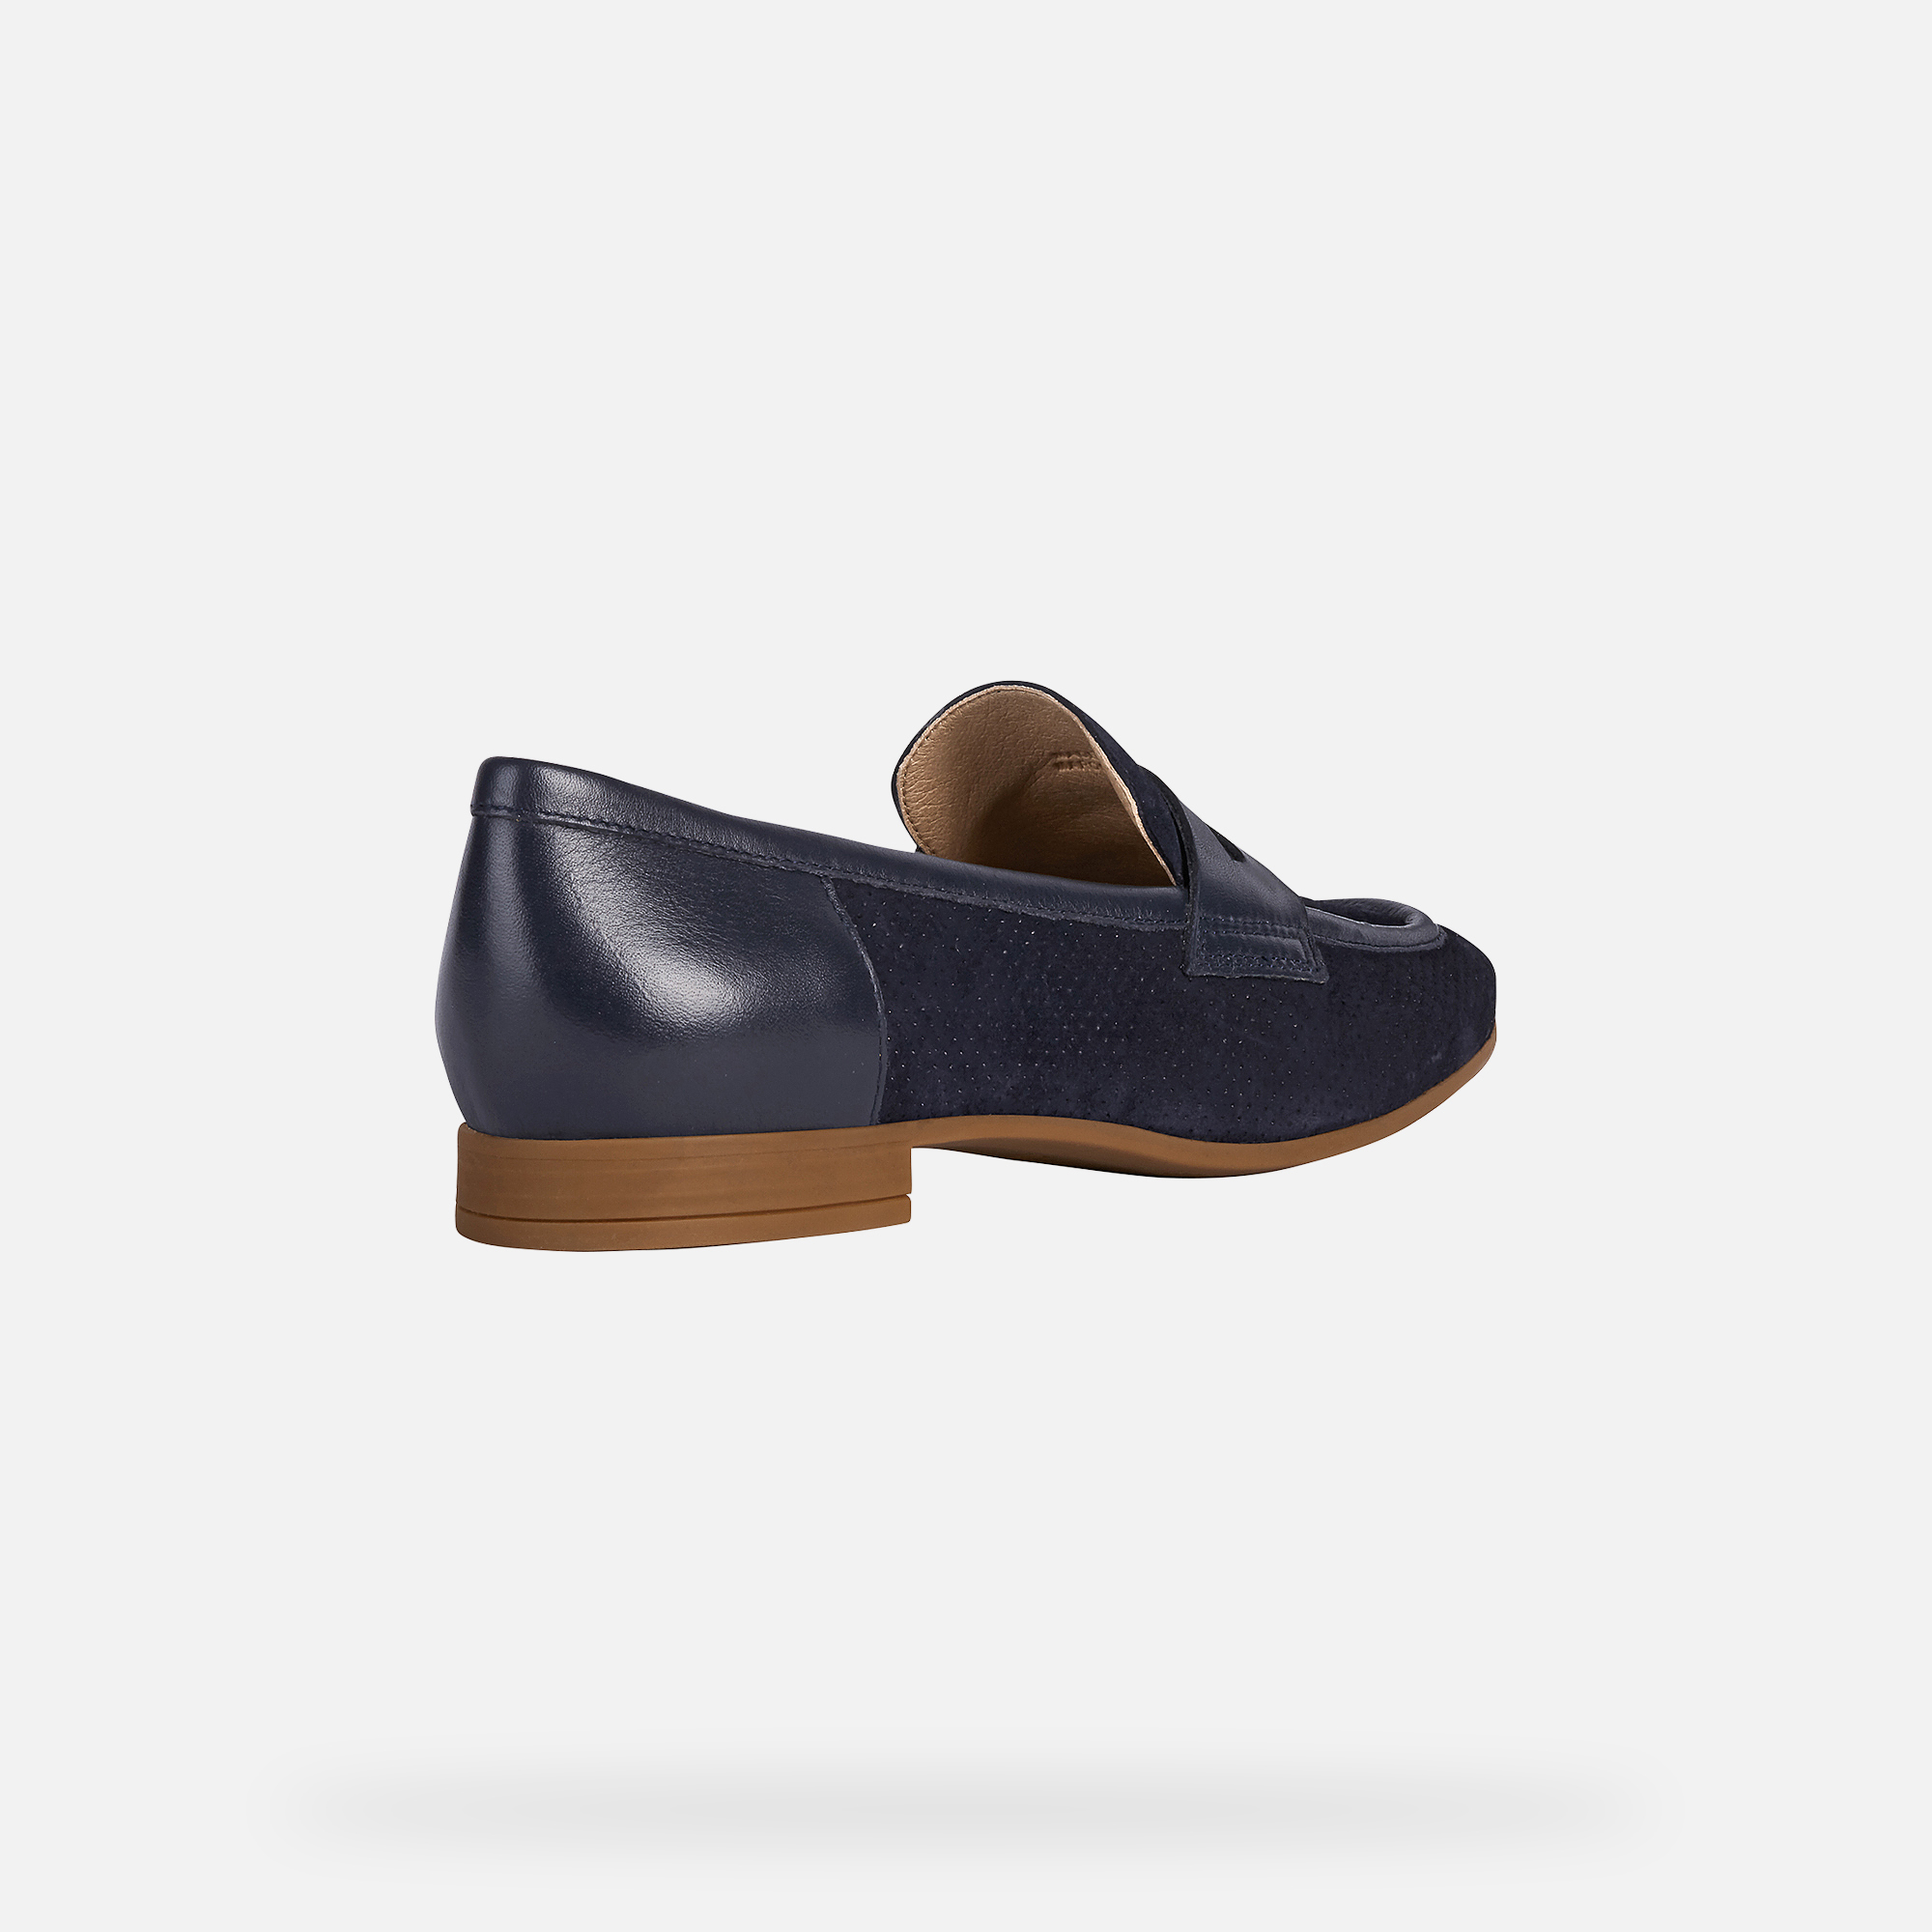 Geox MARLYNA Woman: Dark navy blue Loafers | Geox® Online